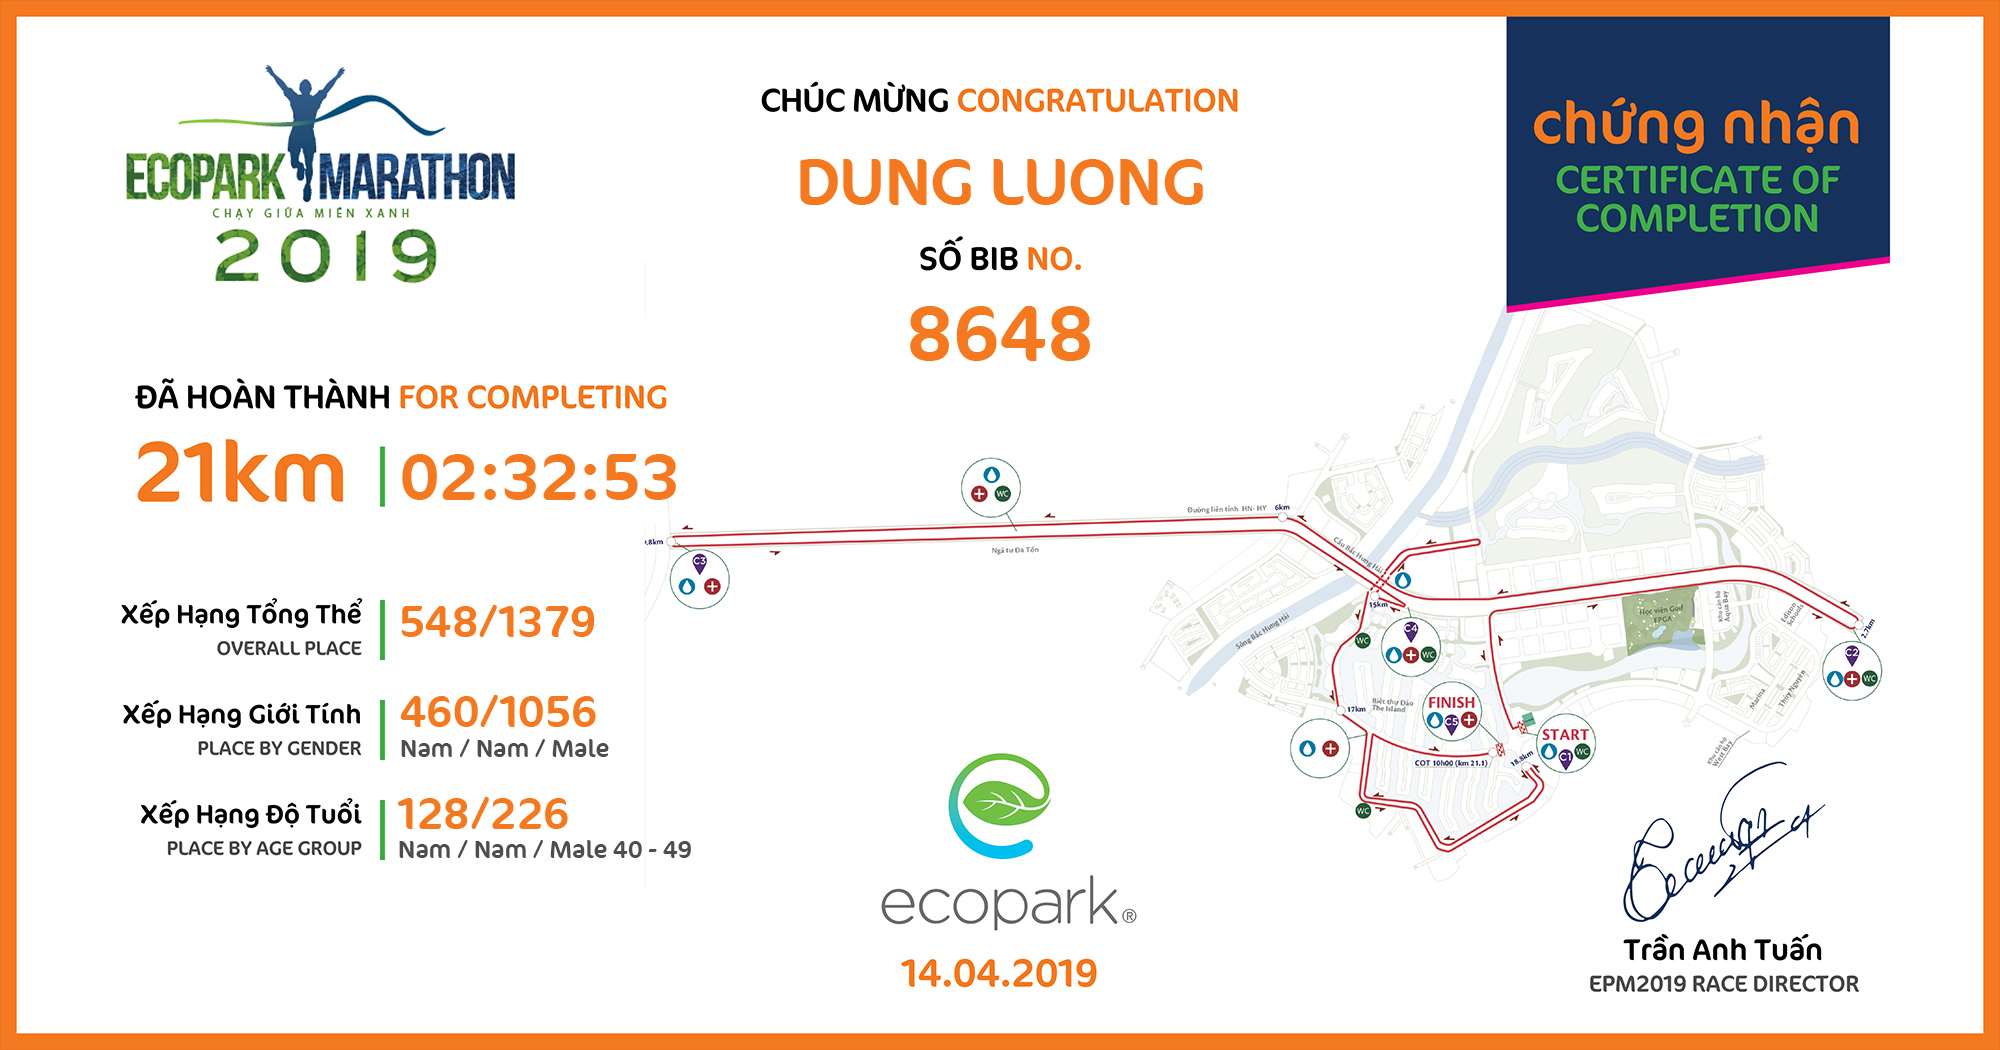 8648 - DUNG LUONG